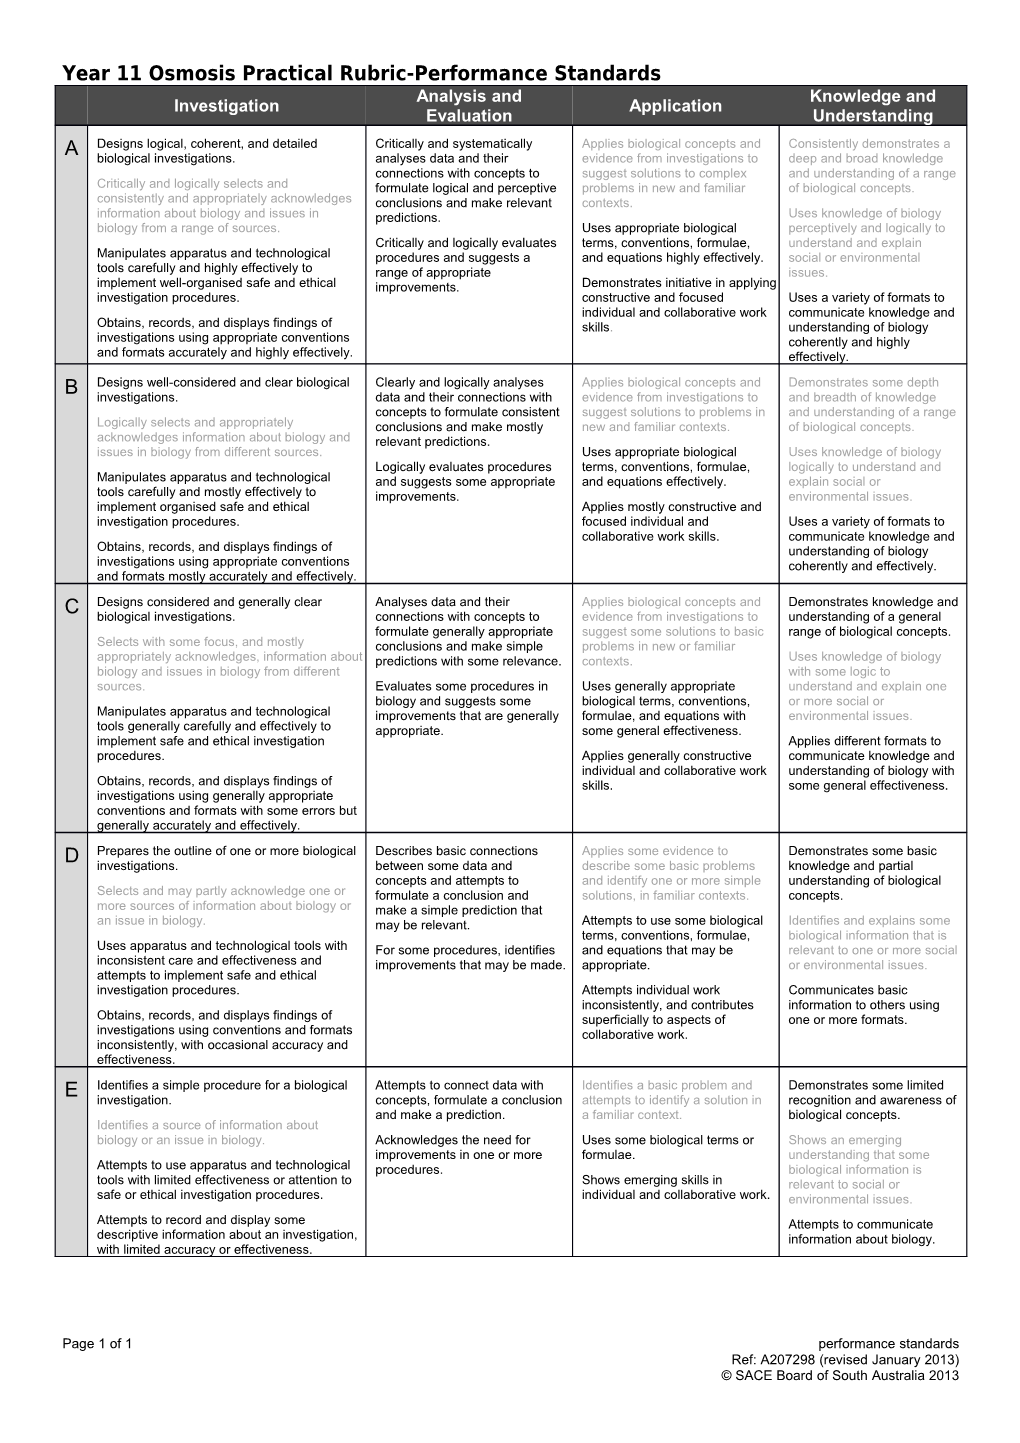 Year 11 Osmosis Practical Rubric-Performance Standards